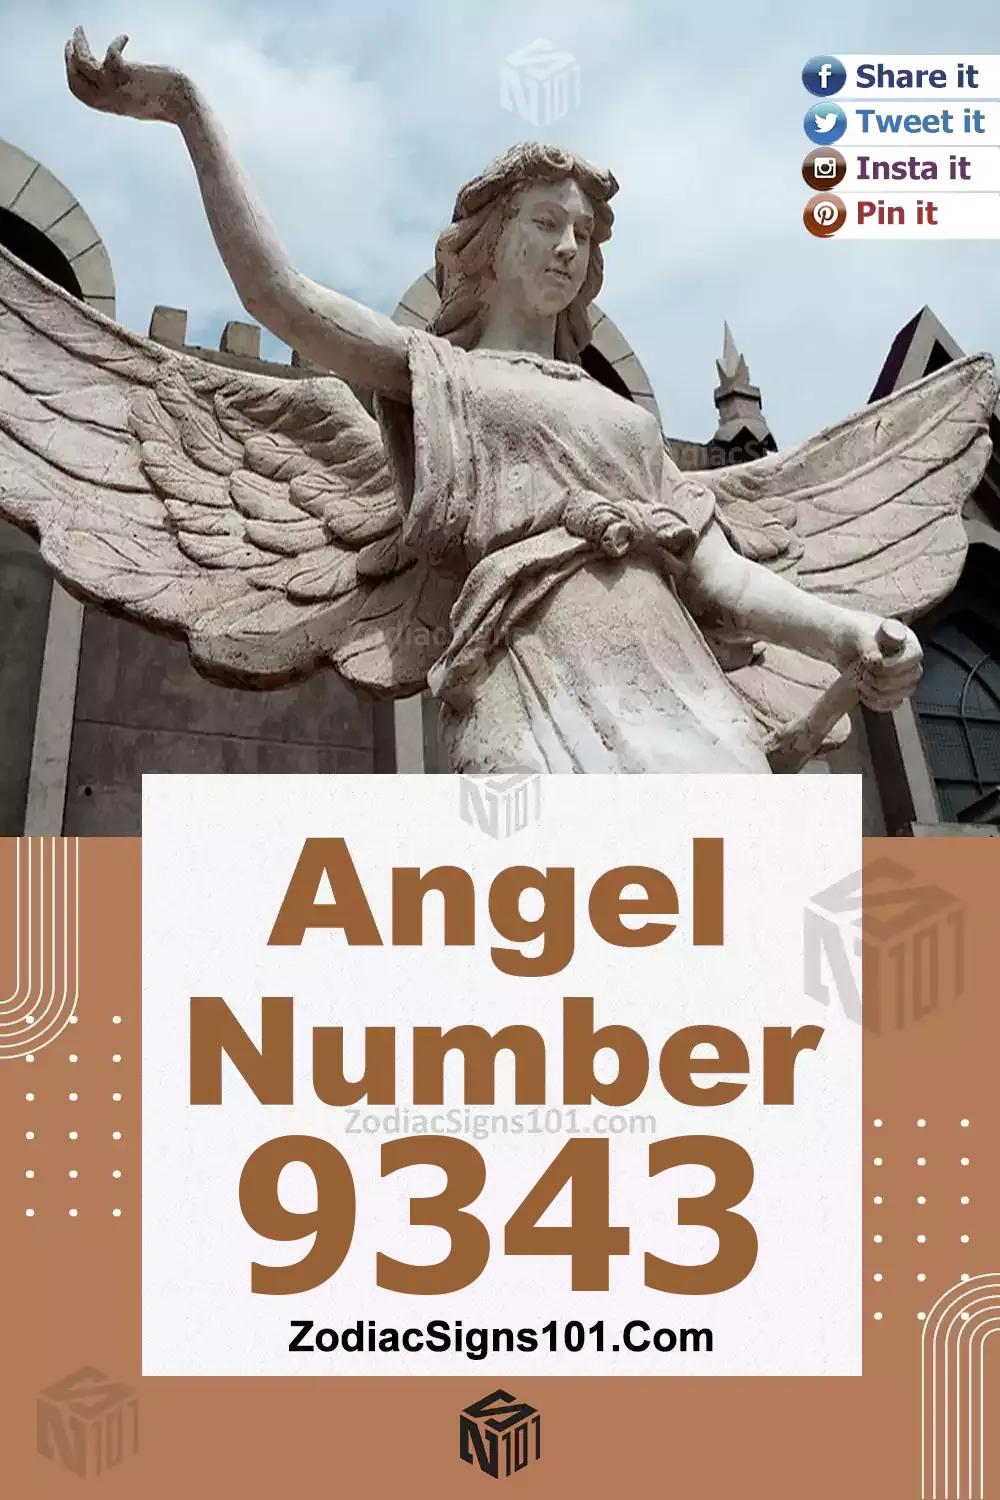 9343 Angel Number Meaning